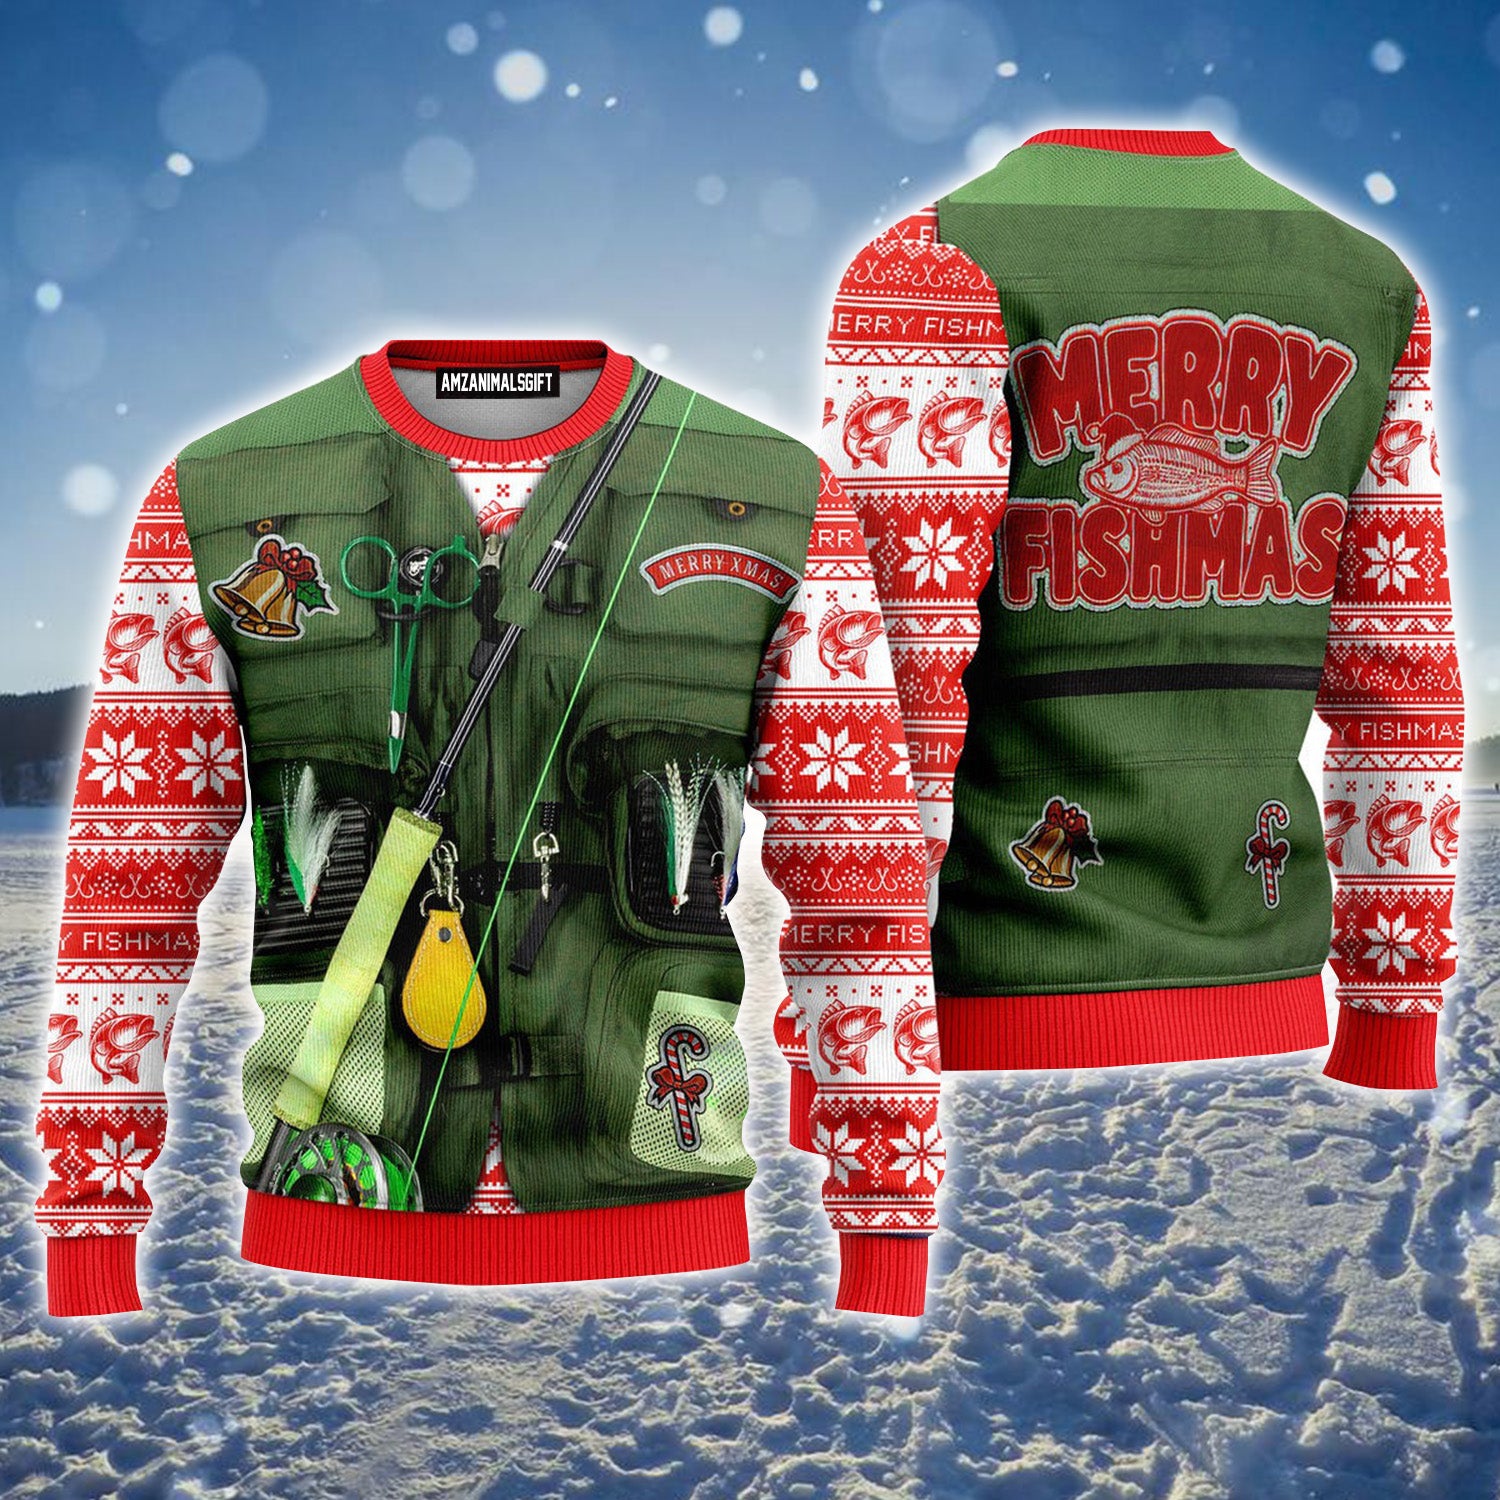 Merry Fishmas Fishing Costume Ugly Christmas Sweater For Men & Women, Perfect Outfit For Christmas New Year Autumn Winter